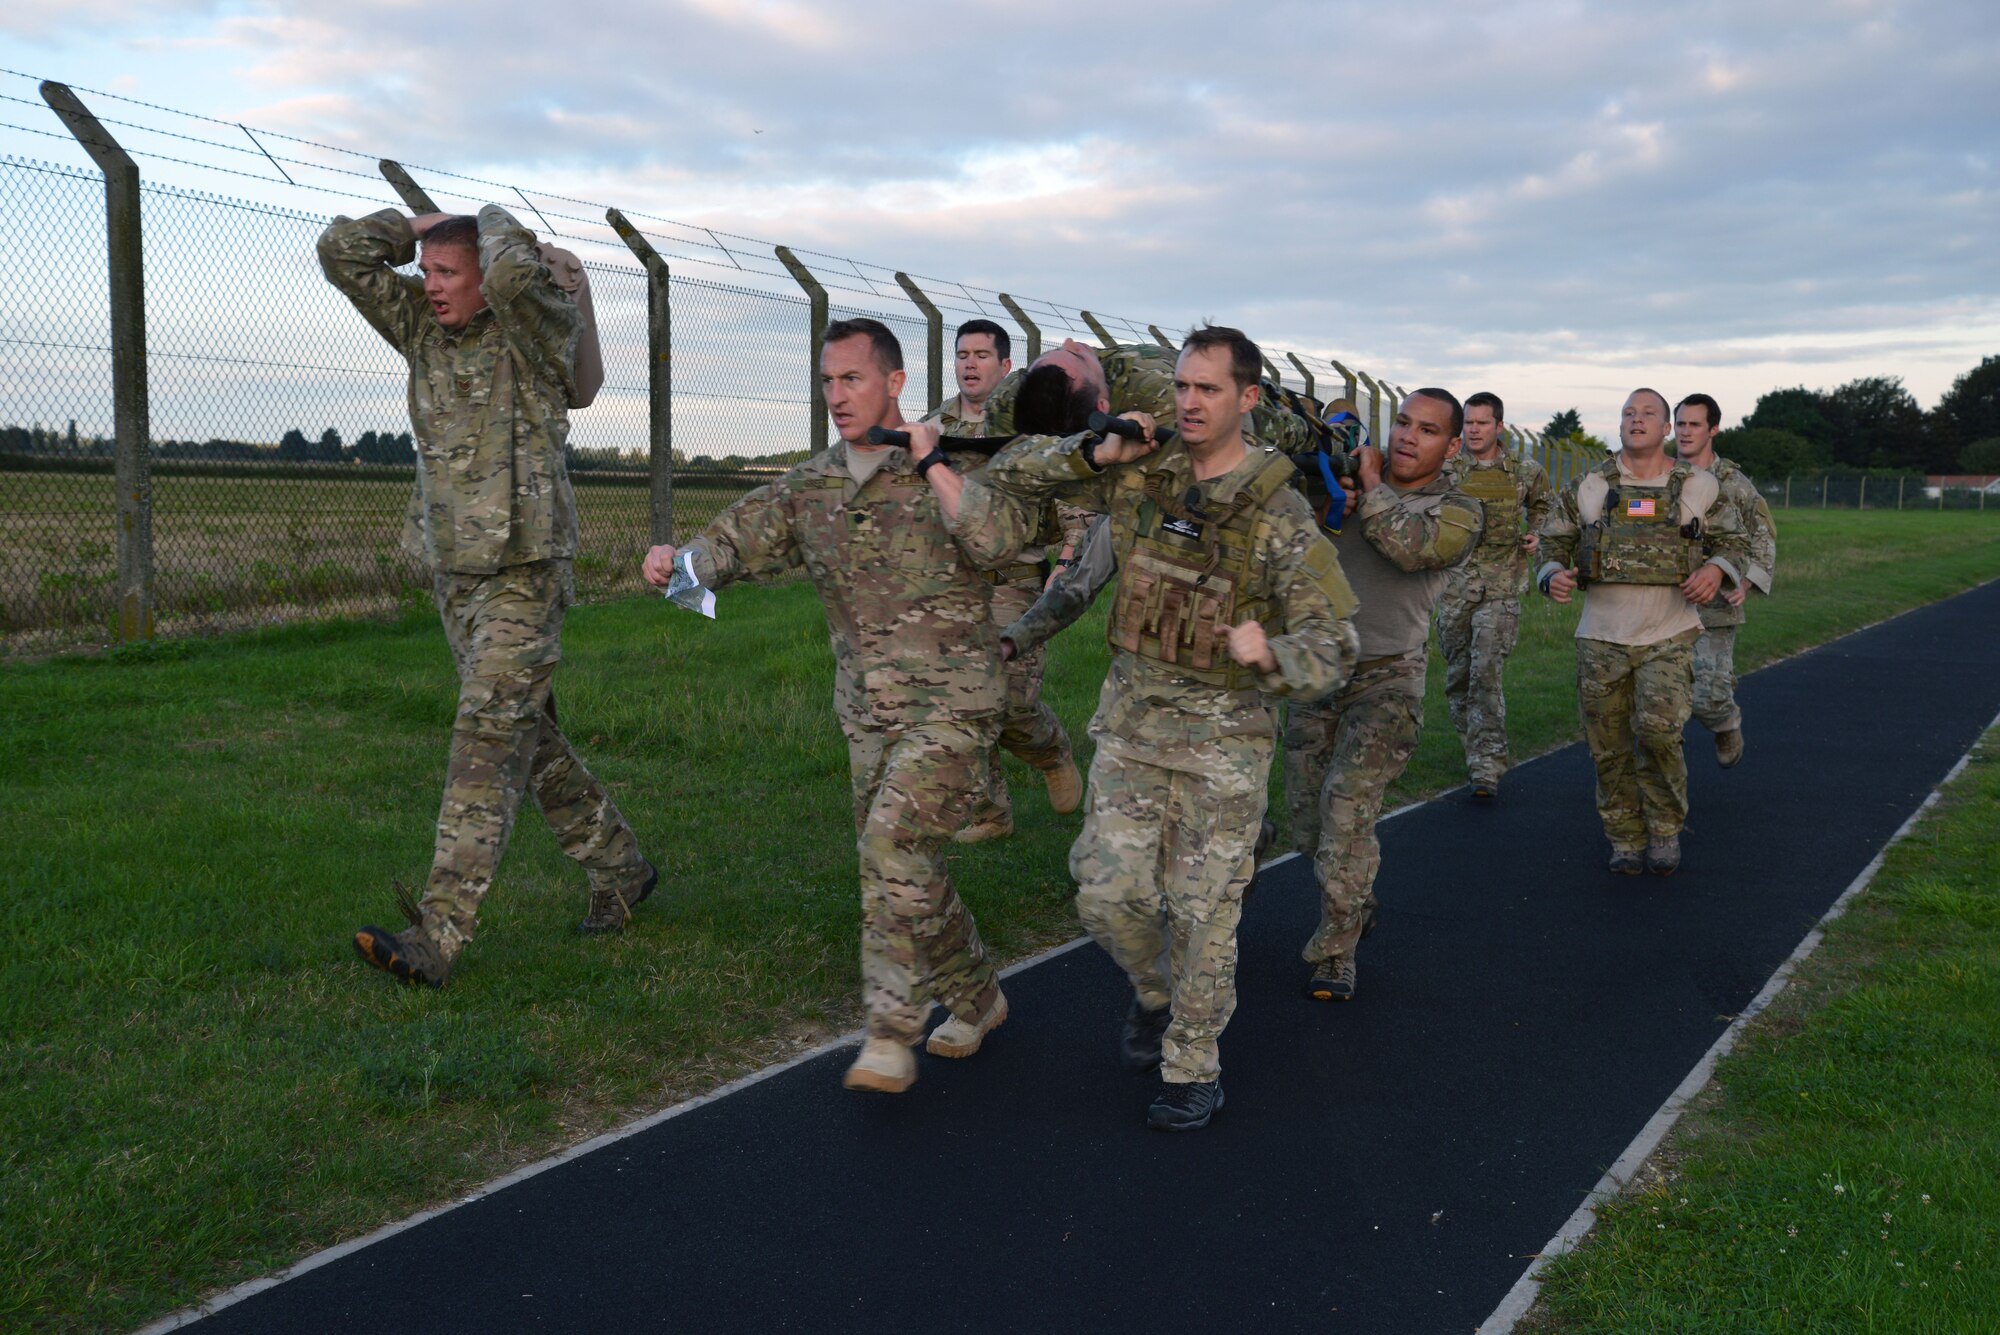 U.S. Air Force Lt. Col. Nathan Green, center, 352nd Special Operations Group commander, and Team 2 carry one of their “injured” teammates Sept. 26, 2014, during the Monster Mash on RAF Mildenhall, England. The Monster Mash consisted of various events such as carrying a Zodiac inflatable boat, marching with a 40-pound rucksack and a blind weapons assembly. A Monster Mash is a long-standing special tactics tradition which combines events designed to test the strength, stamina, and problem solving skills. (U.S. Air Force photo/Tech. Sgt. Stacia Zachary/Released)